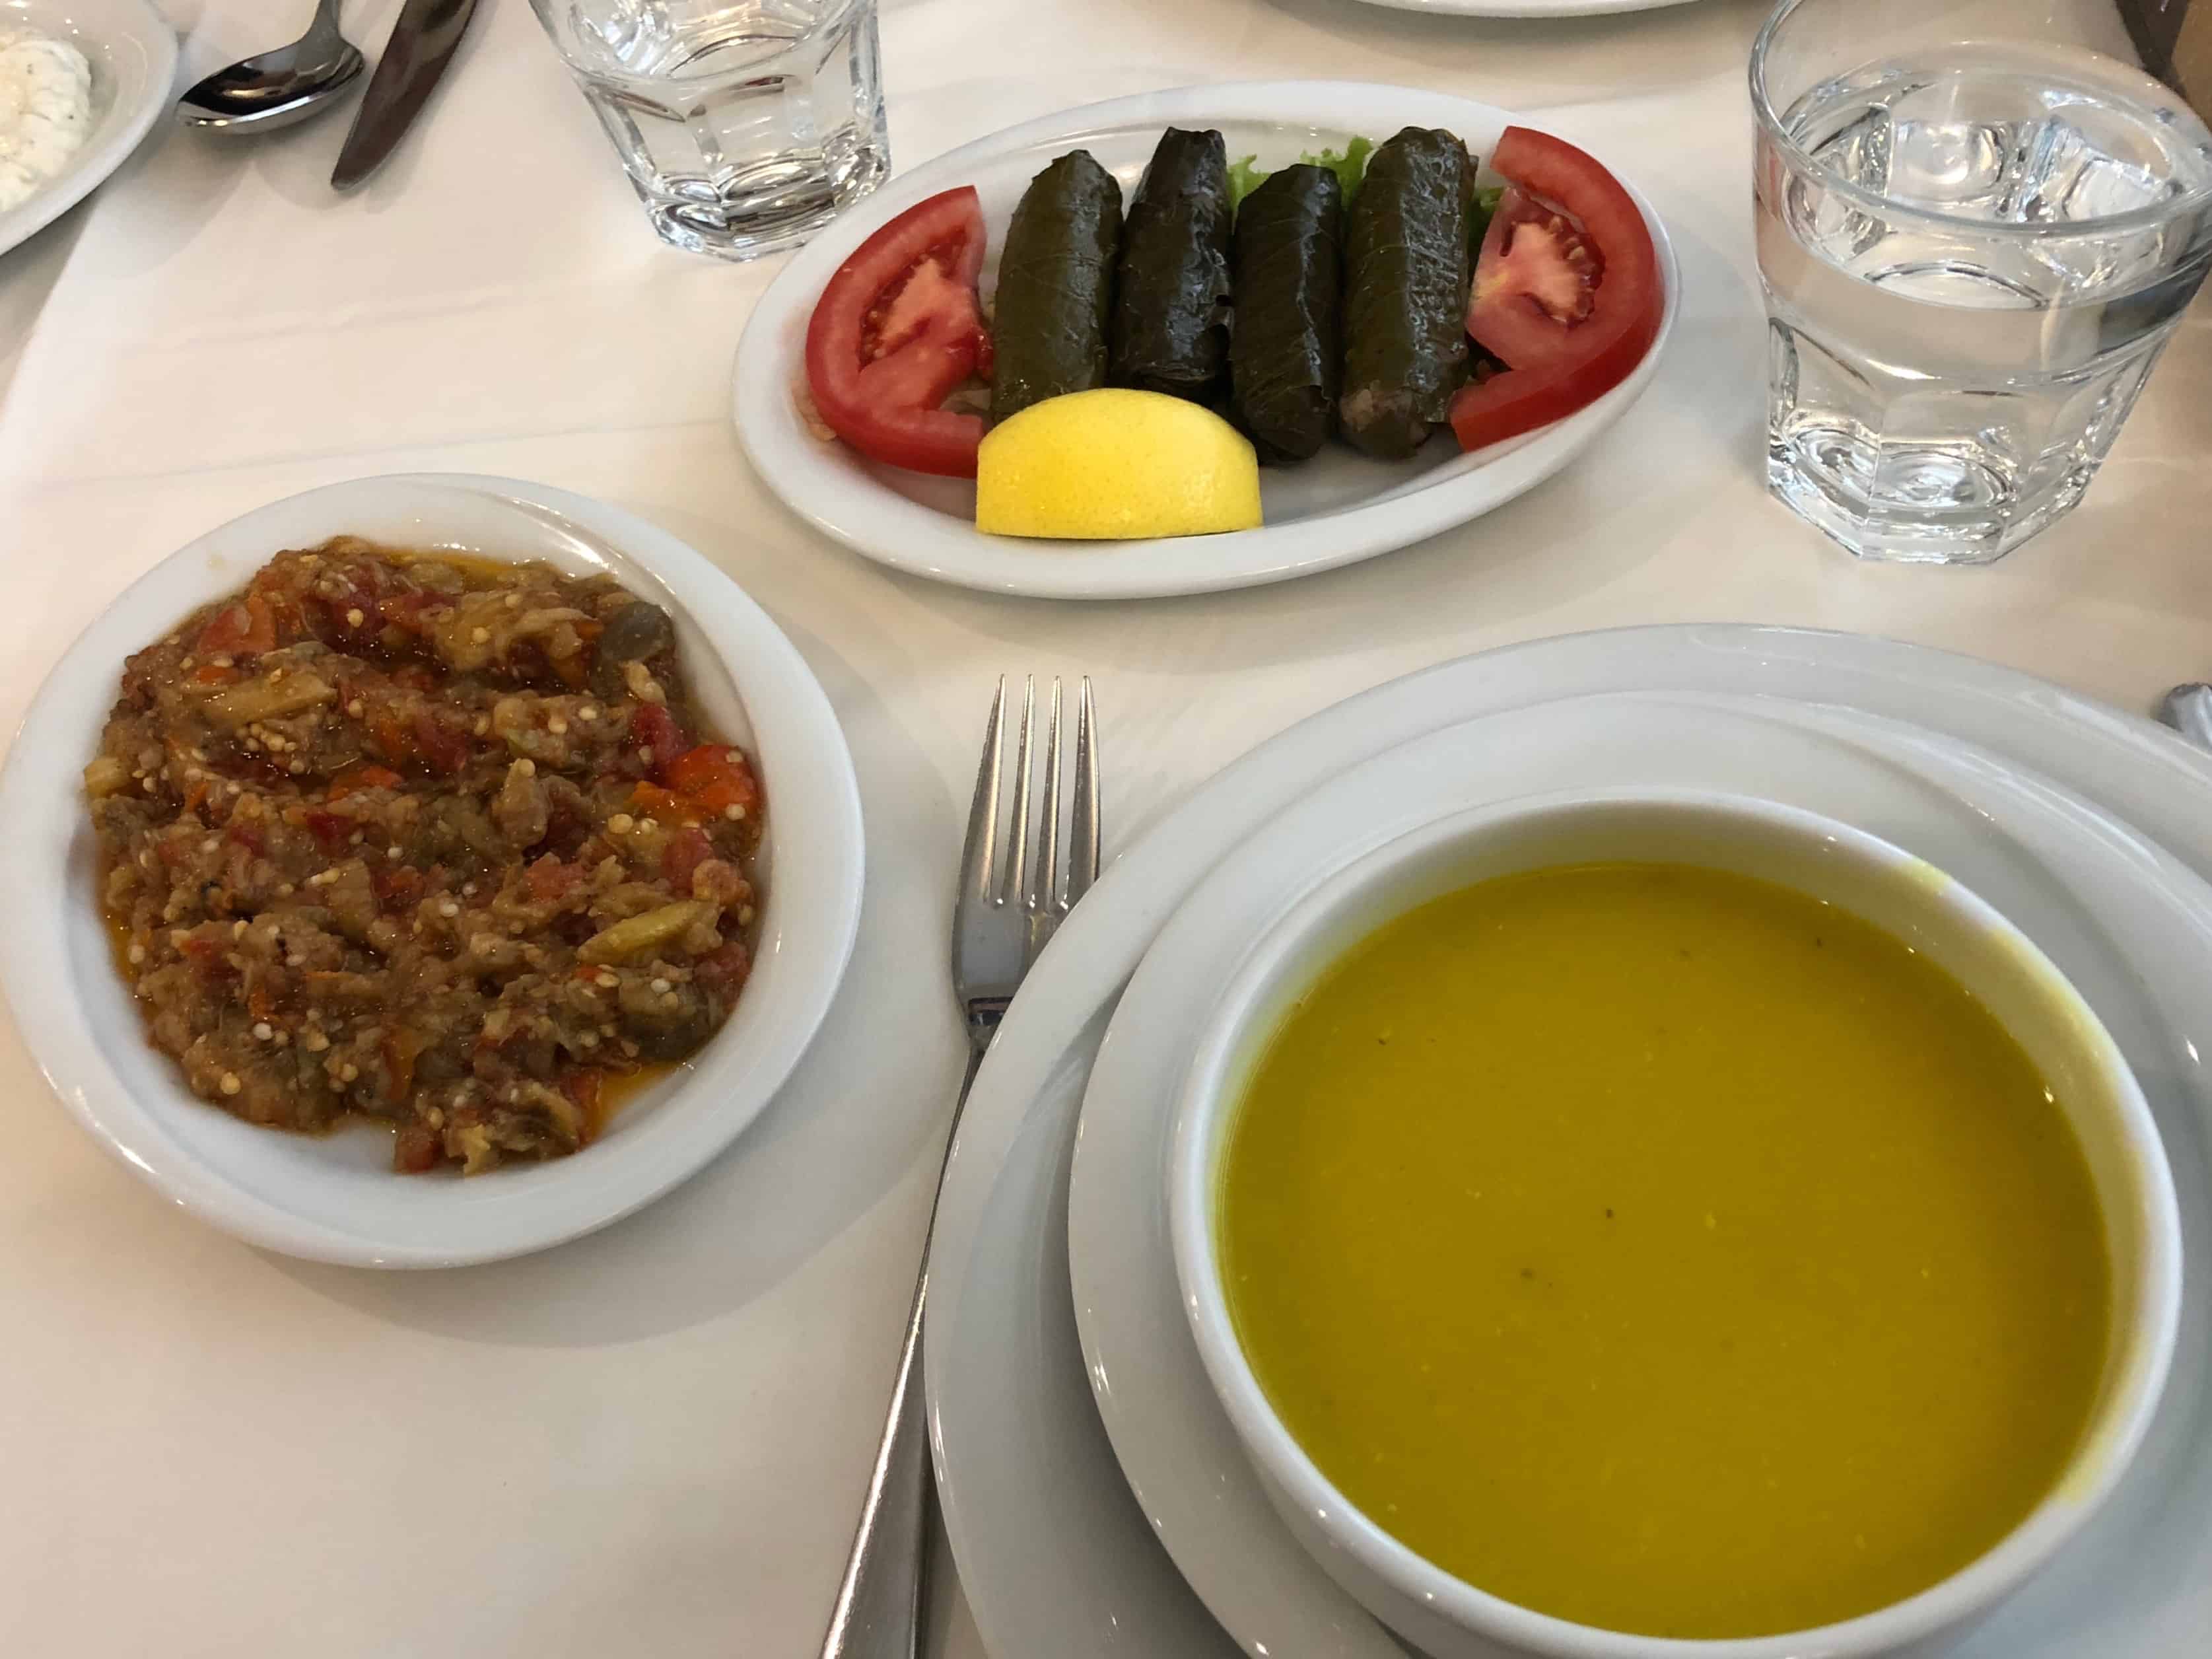 Soup and meze dishes at Kebapçı Mahmut in Fatih, Istanbul, Turkey